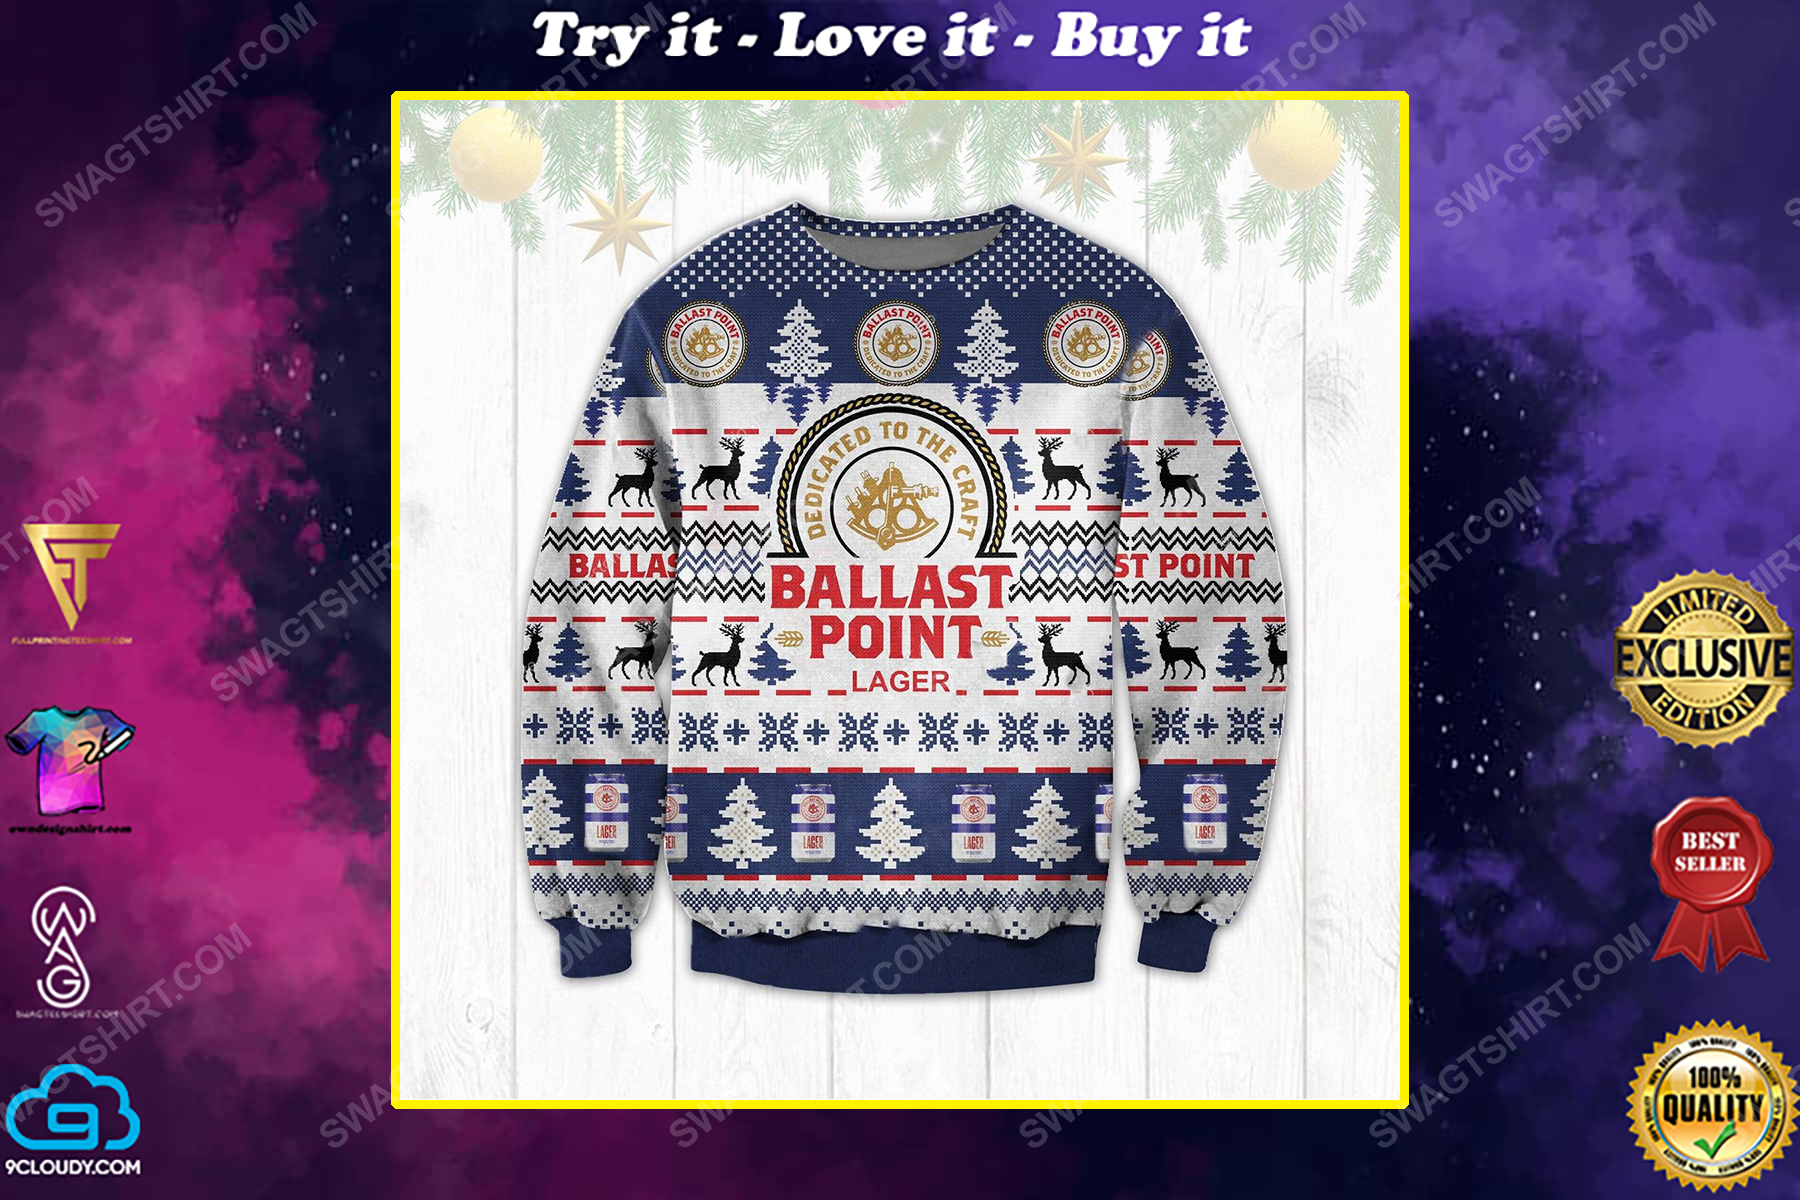 The ballast point lager ugly christmas sweater